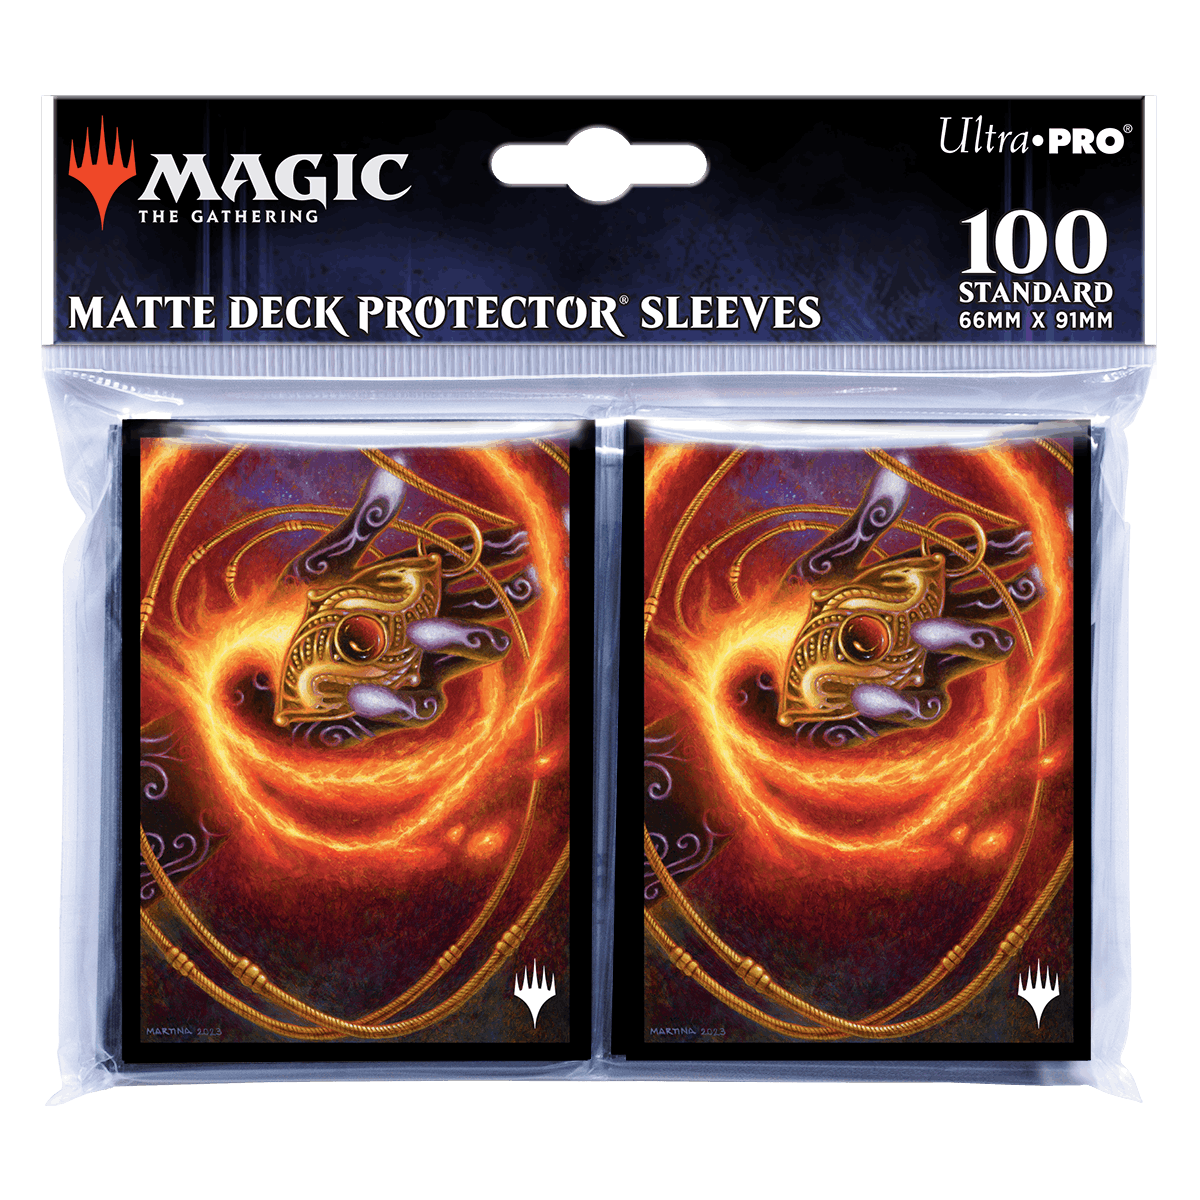 Modern Horizons 3 Ruby Medallion Deck Protector Sleeves (100ct) for Magic: The Gathering | Ultra PRO International